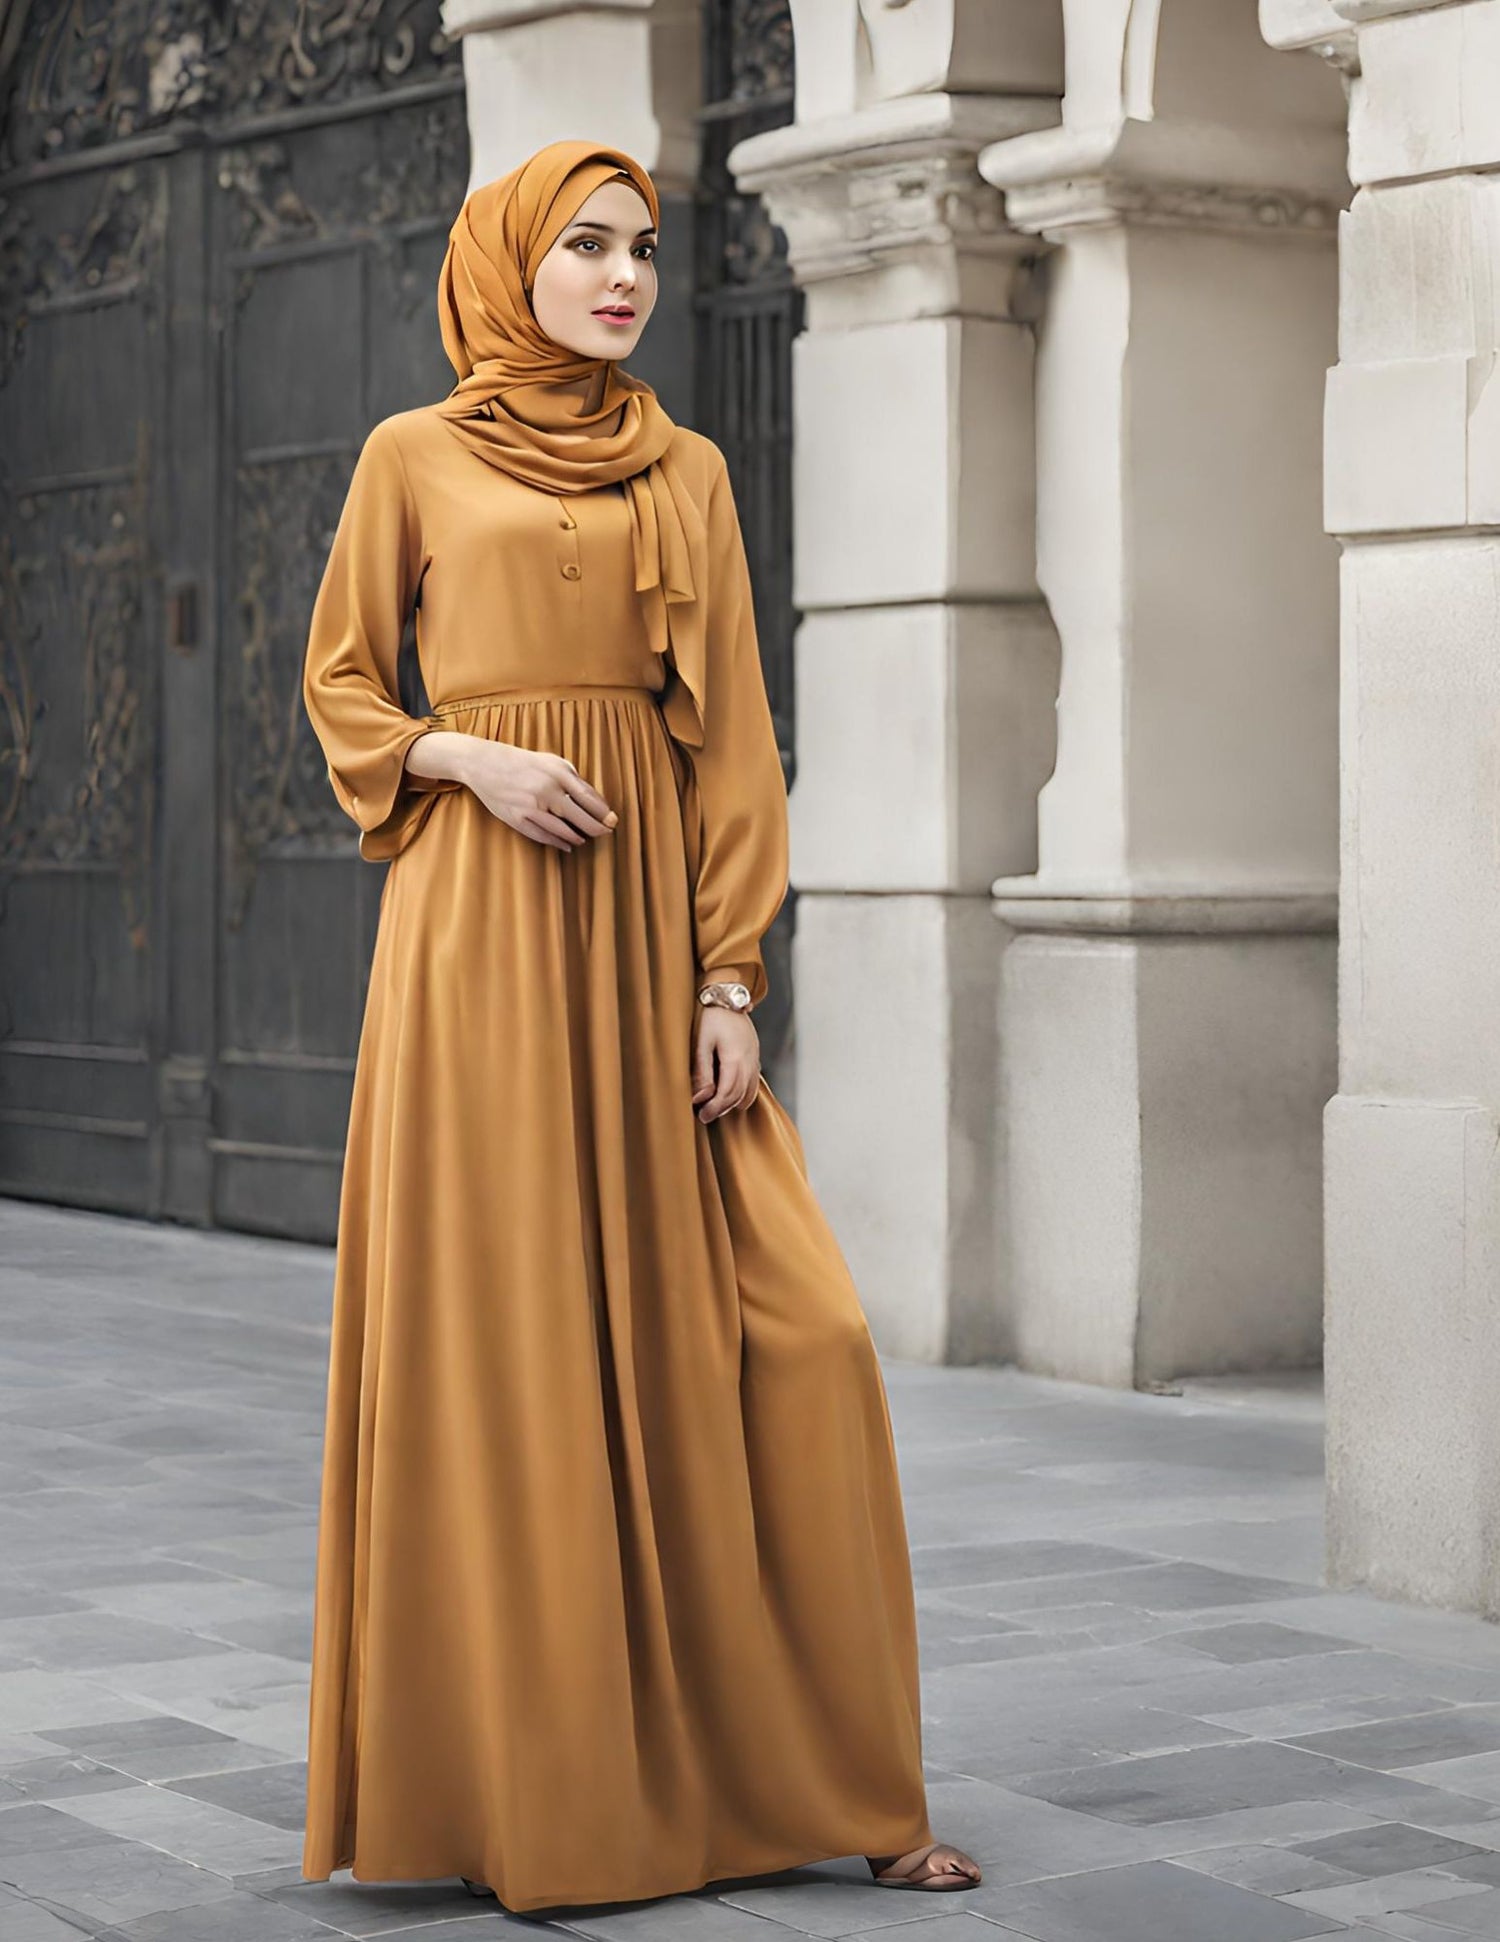 Modest Clothing and Ramadan: The important of Abaya and Modest Clothing for those observing Ramadan